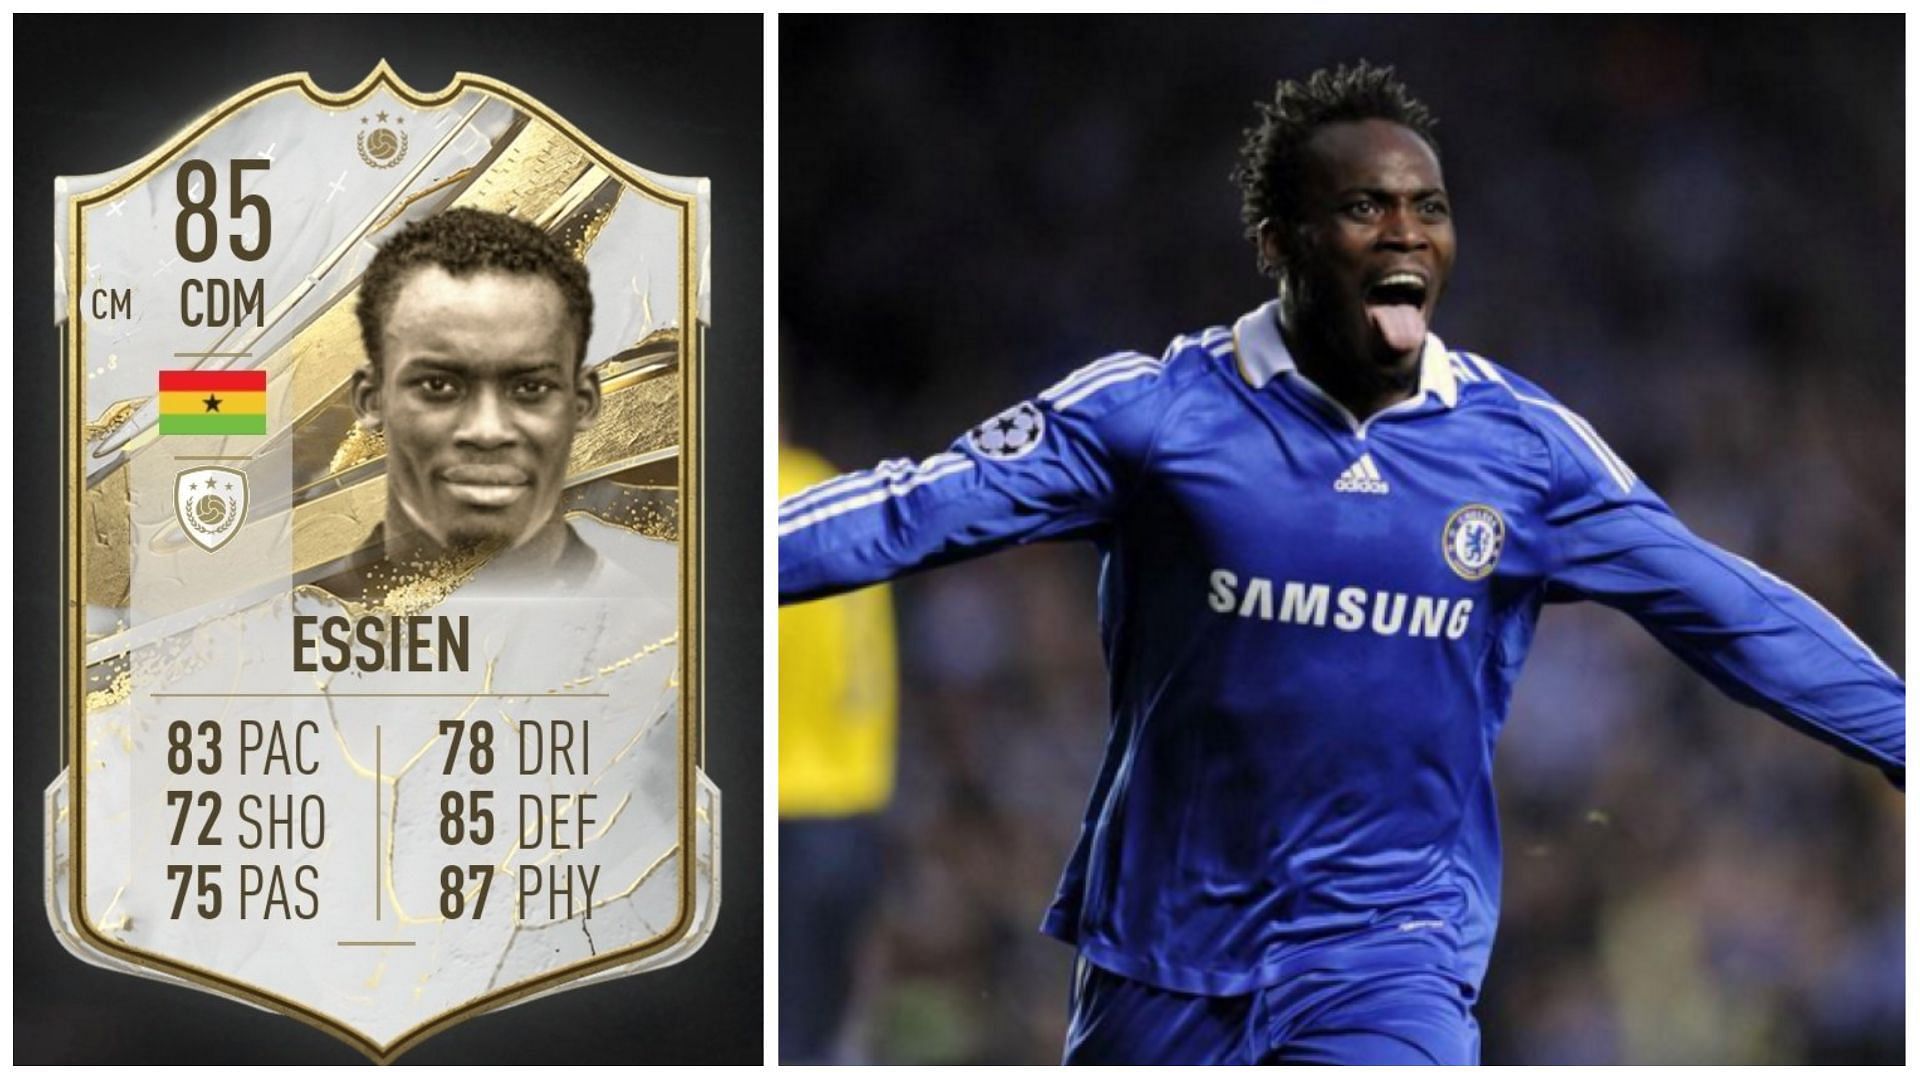 Base Icon Michael Essien is available as an SBC in FIFA 23 (Images via EA Sports and Getty Images)